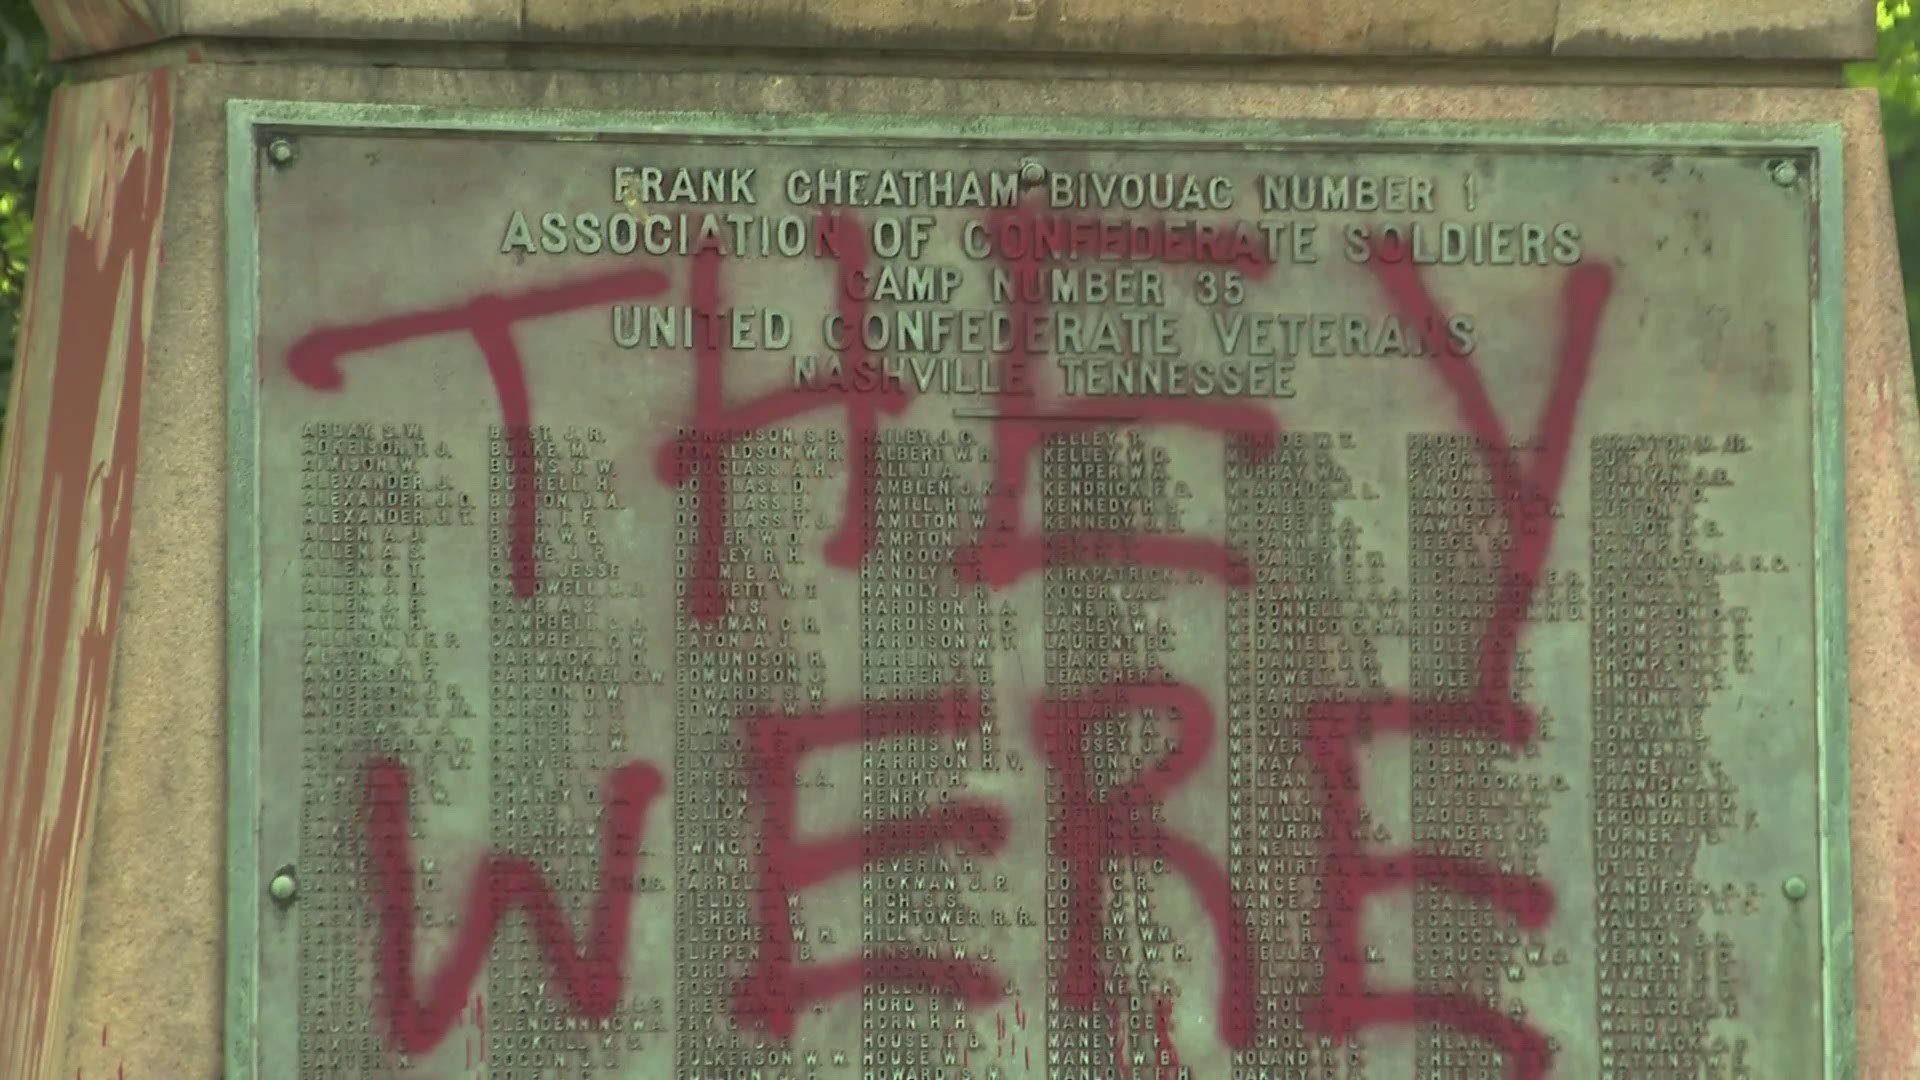 Splatters of red paint and the phrase "they were racists" were found Monday on a Confederate monument in Nashville.

The vandalism was found on the Confederate Prive Monument in Centennial Park. The phrase was written in red paint over a plaque with names of more than 500 Confederate soldiers from Tennessee. 

News Channel 5 Nashville said officials aren't sure how long it will take to clean the monument, which was dedicated in 1909

The Tennessean reports the Confederate monument is one of two in the county, with about 70 more across the state. The Metro Nashville Police Department said there hasn't been a vandalism incident like this in the park in nearly seven years.

Police said they're going to review surveillance video from the park, News Channel 5 said. 

Two years ago, a privately-owned statue of Nathan Bedford Forrest, the first grand wizard of the Ku Klux Klan, along Interstate 65 was covered in pink paint. The Tennessean said the paint is still there because the owner wants to "draw attention" to the statue.

Information from The Associated Press contributed to this report.